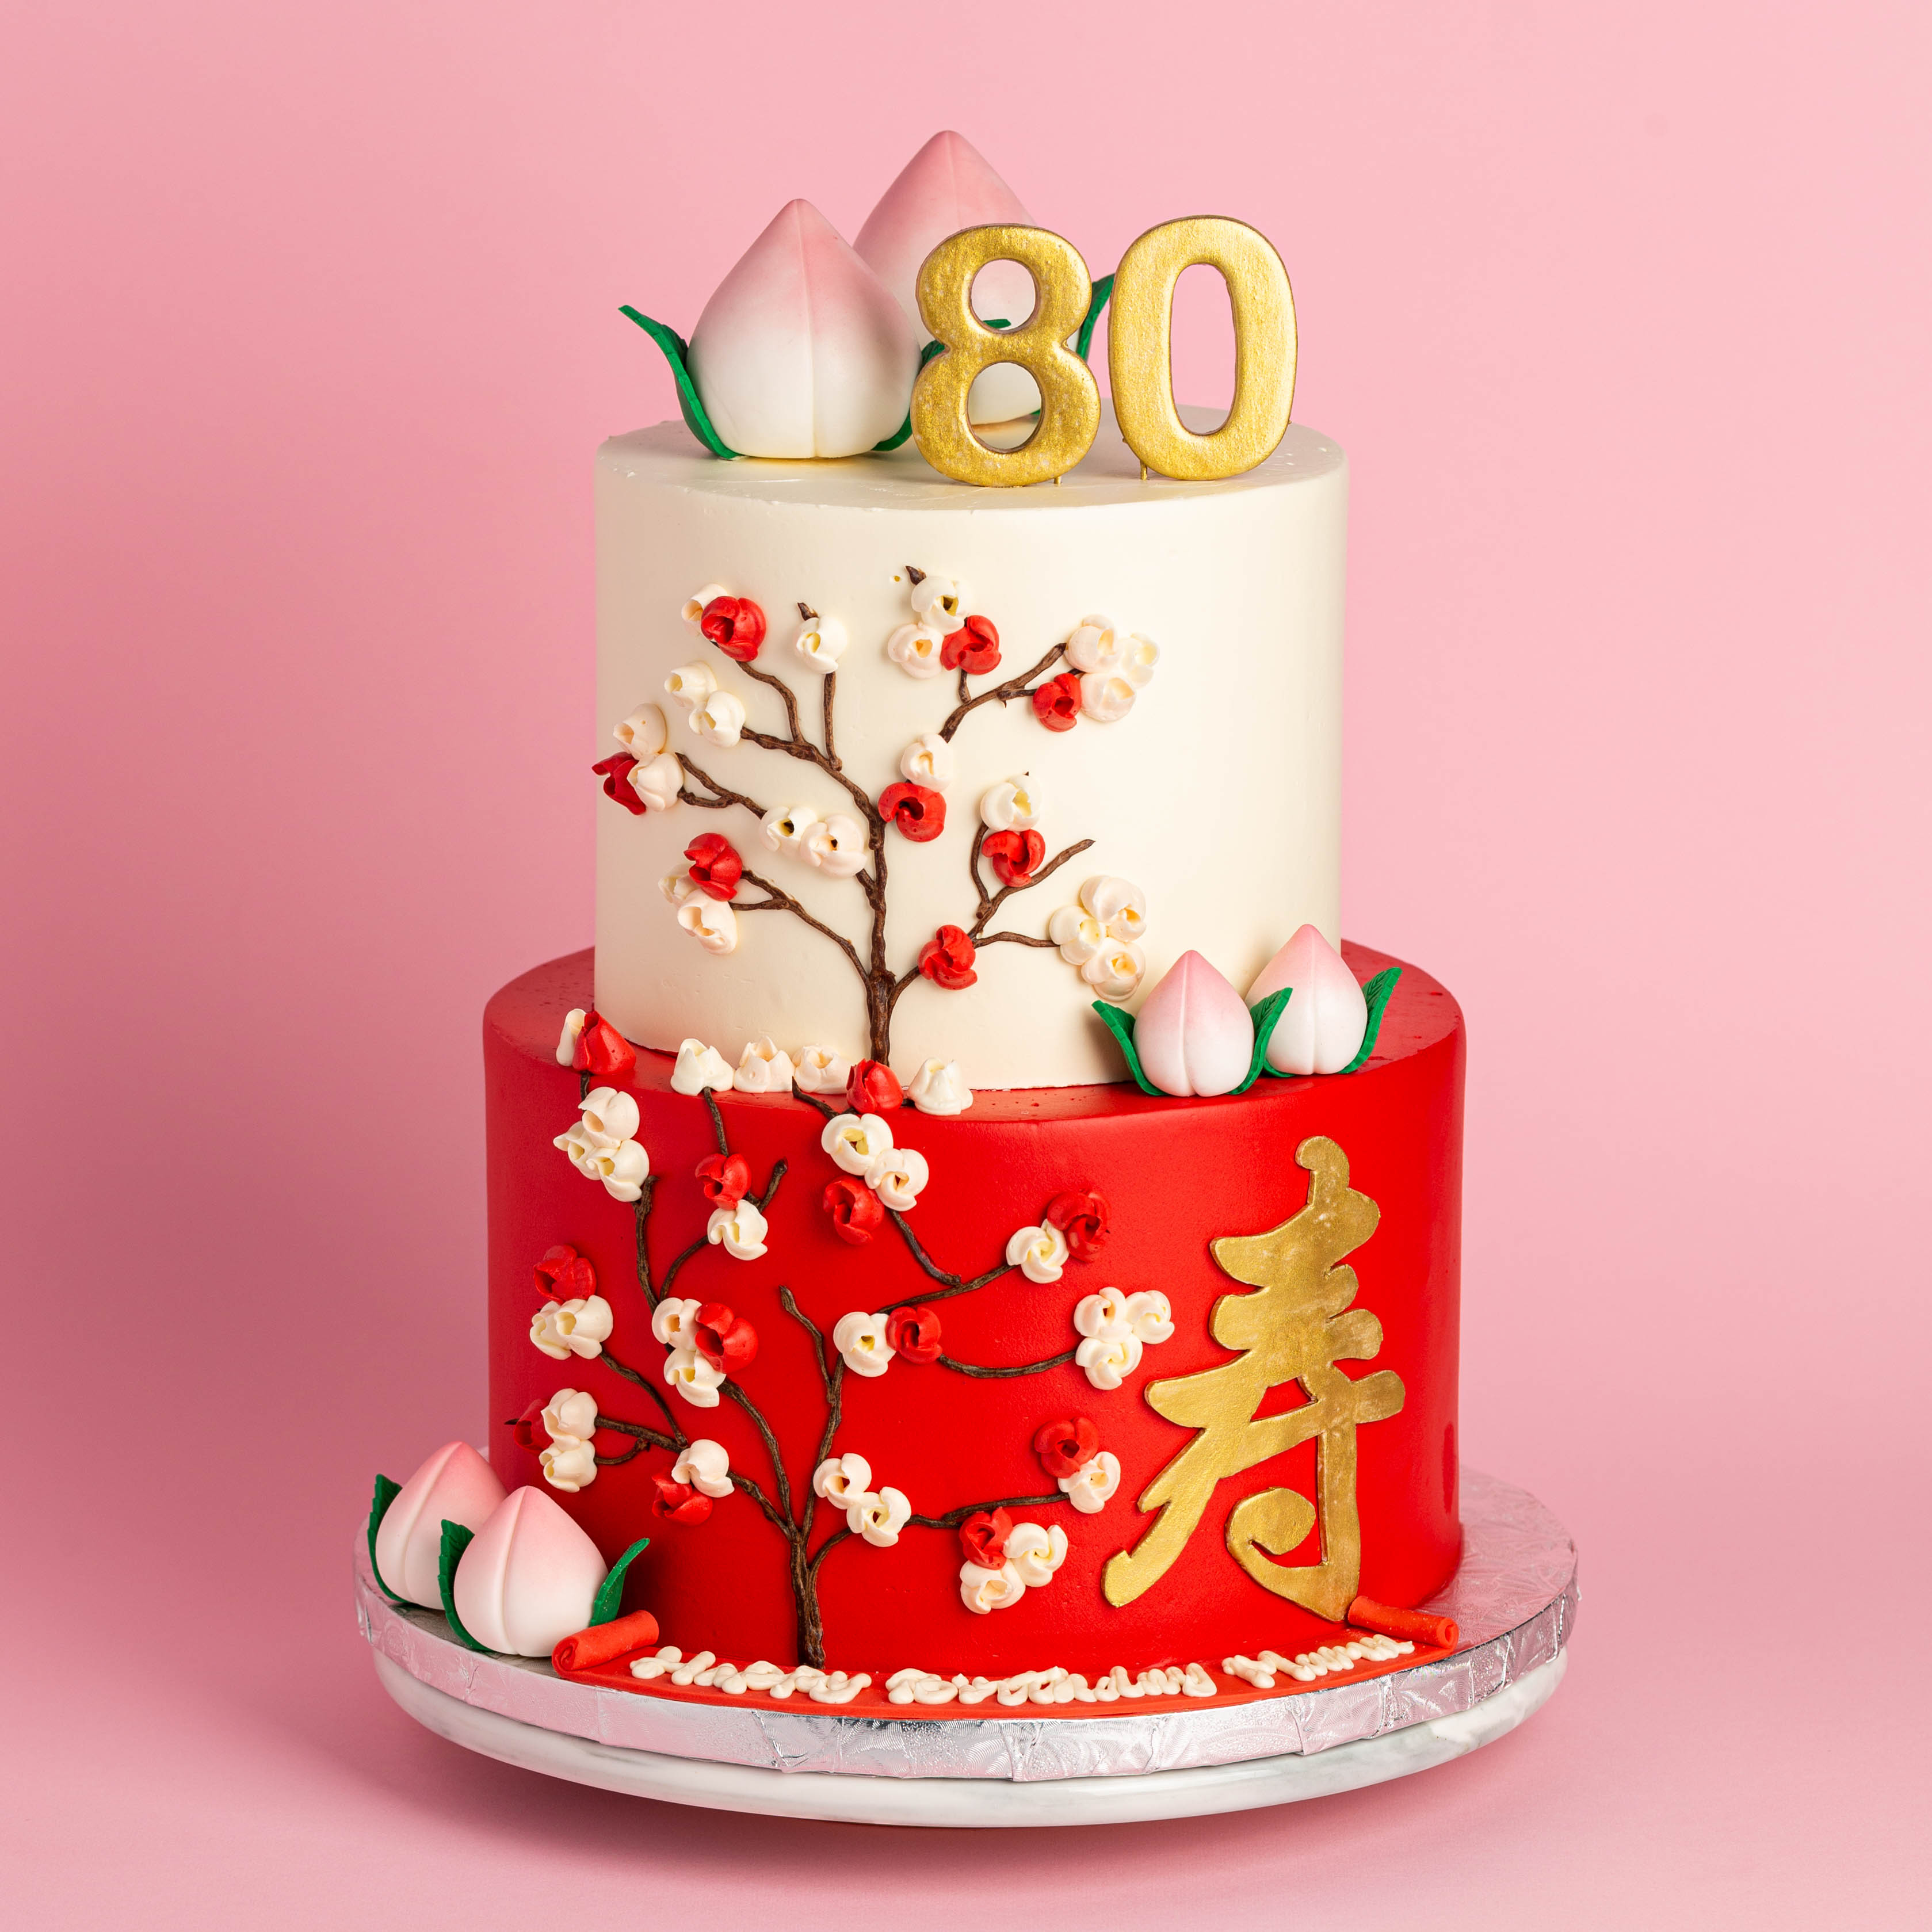 Cakes by Alyanna - Sharing this super thoughtful Chinese birthday cake just  in time for this coming CNY! 🎉 This Fondant cake has an intricately  handpainted image of Ancient Chinese Crane, along